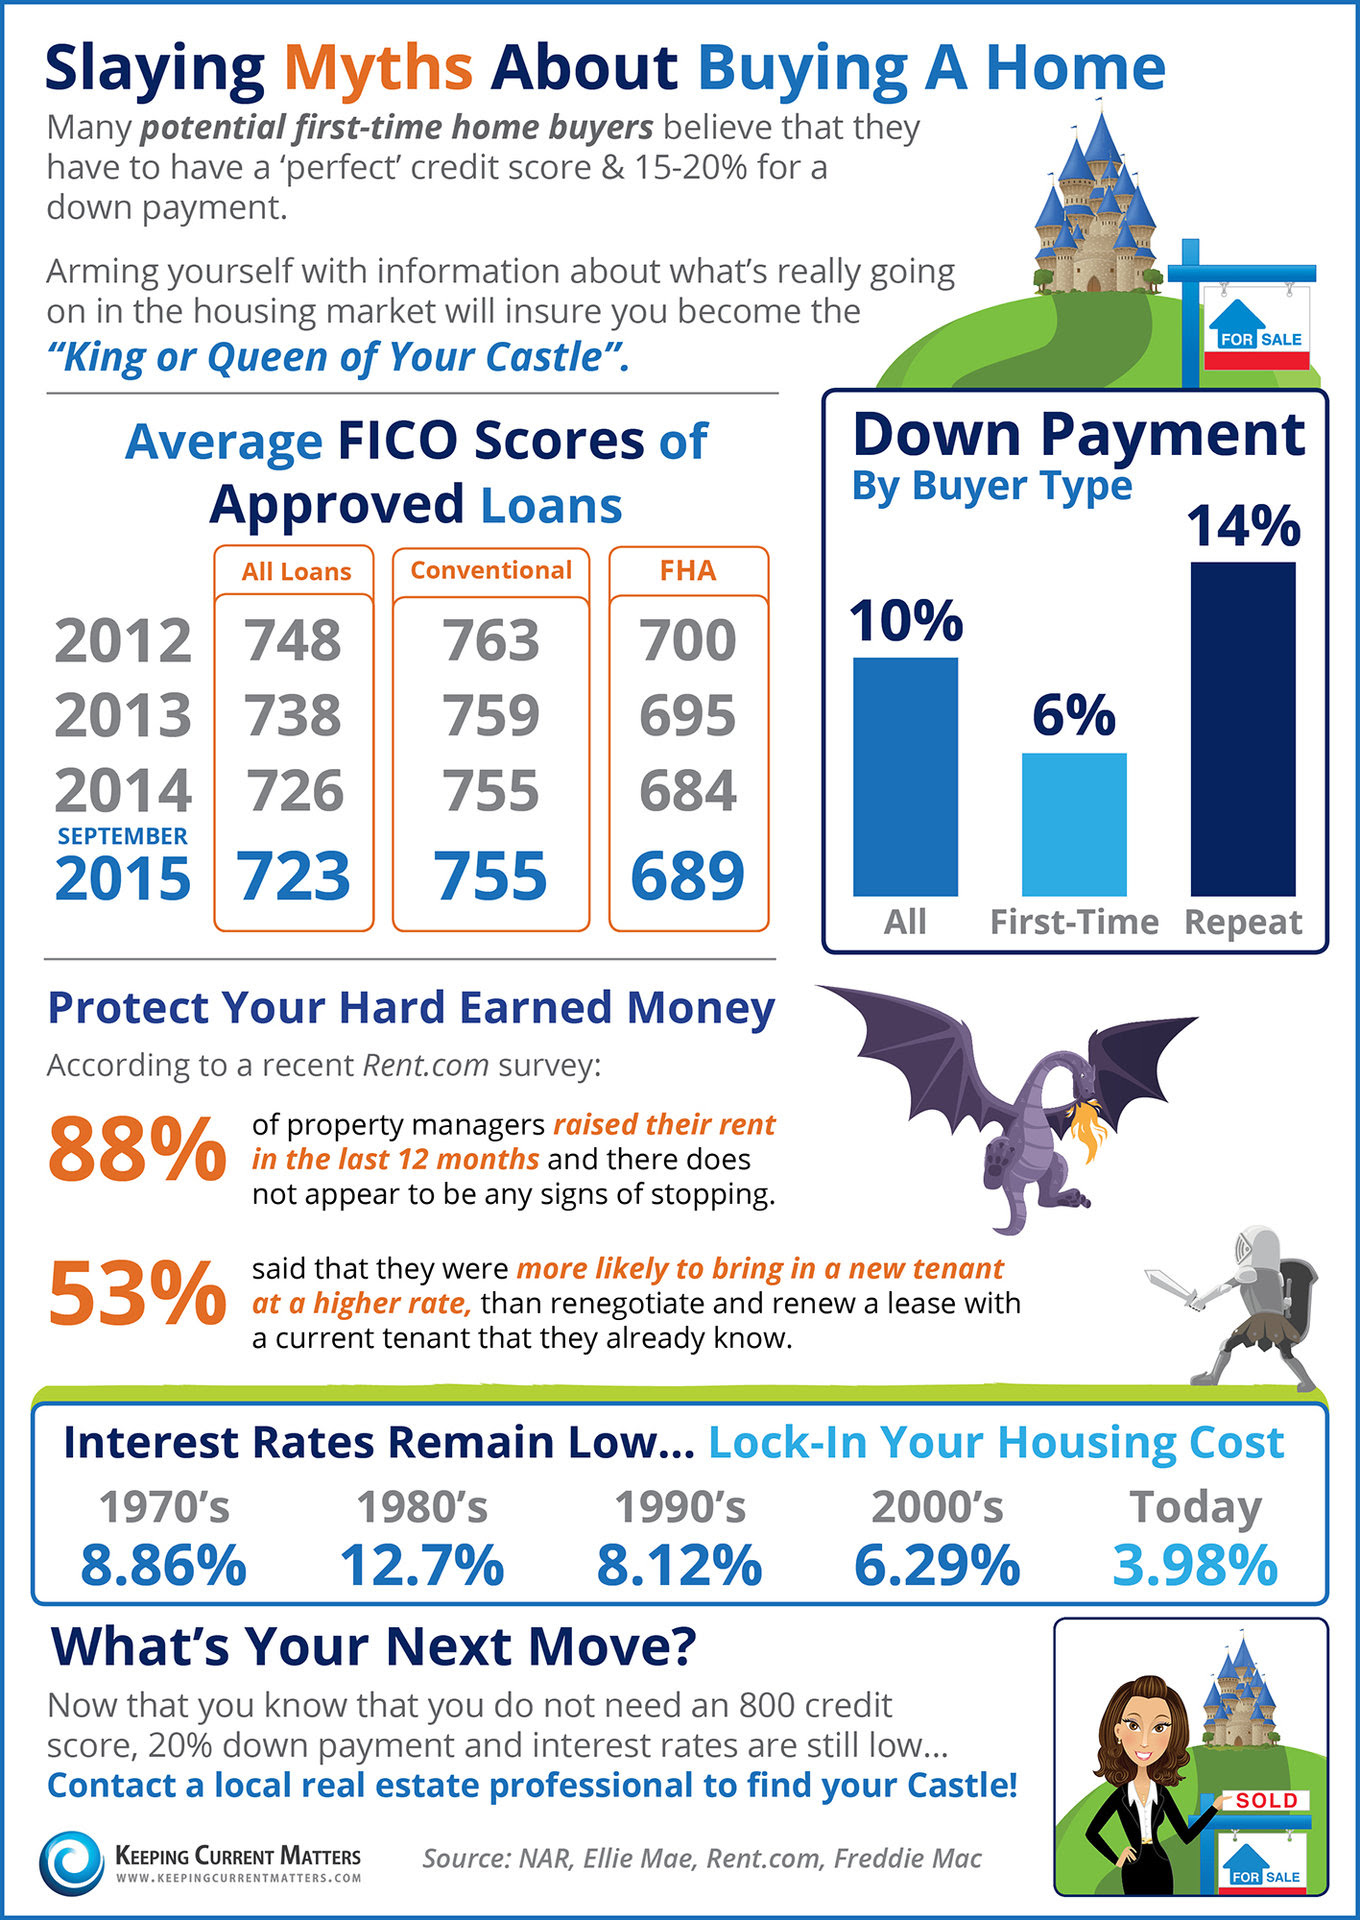 Slaying Myths About Buying A Home [INFOGRAPHIC] | Keeping Current Matters